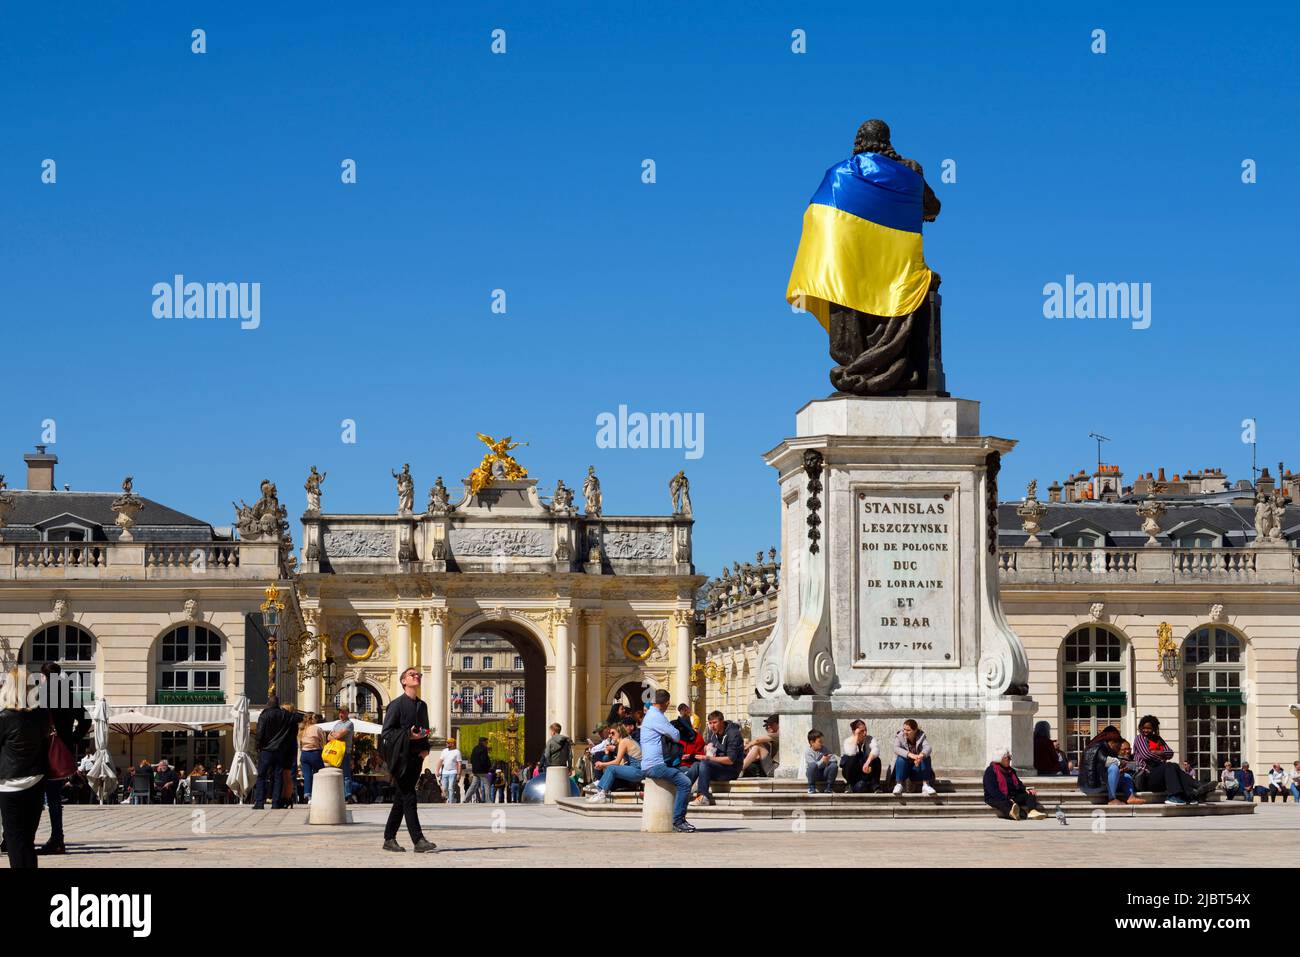 France, Meurthe and Moselle, Nancy, place Stanislas (former Place Royale) built by Stanislas Leszczynski, king of Poland and last duke of Lorraine in the eighteenth century, classified World Heritage of UNESCO, statue of Stanislas Leszczynski with Ukrainian flag Stock Photo